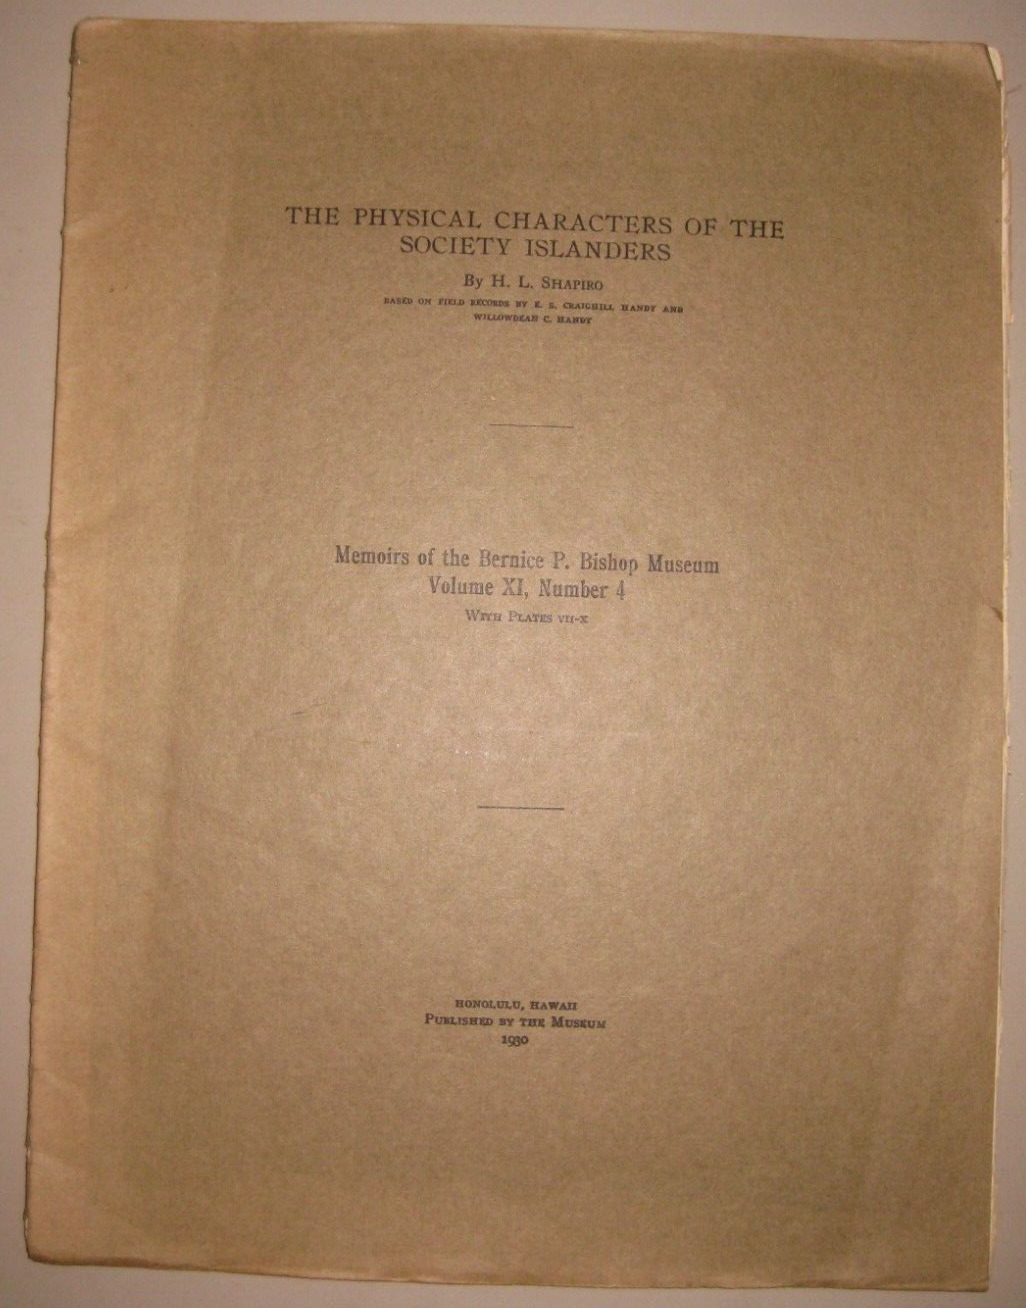 The Physical Characters of the Society Islanders - Shapiro, 1930, eugenics